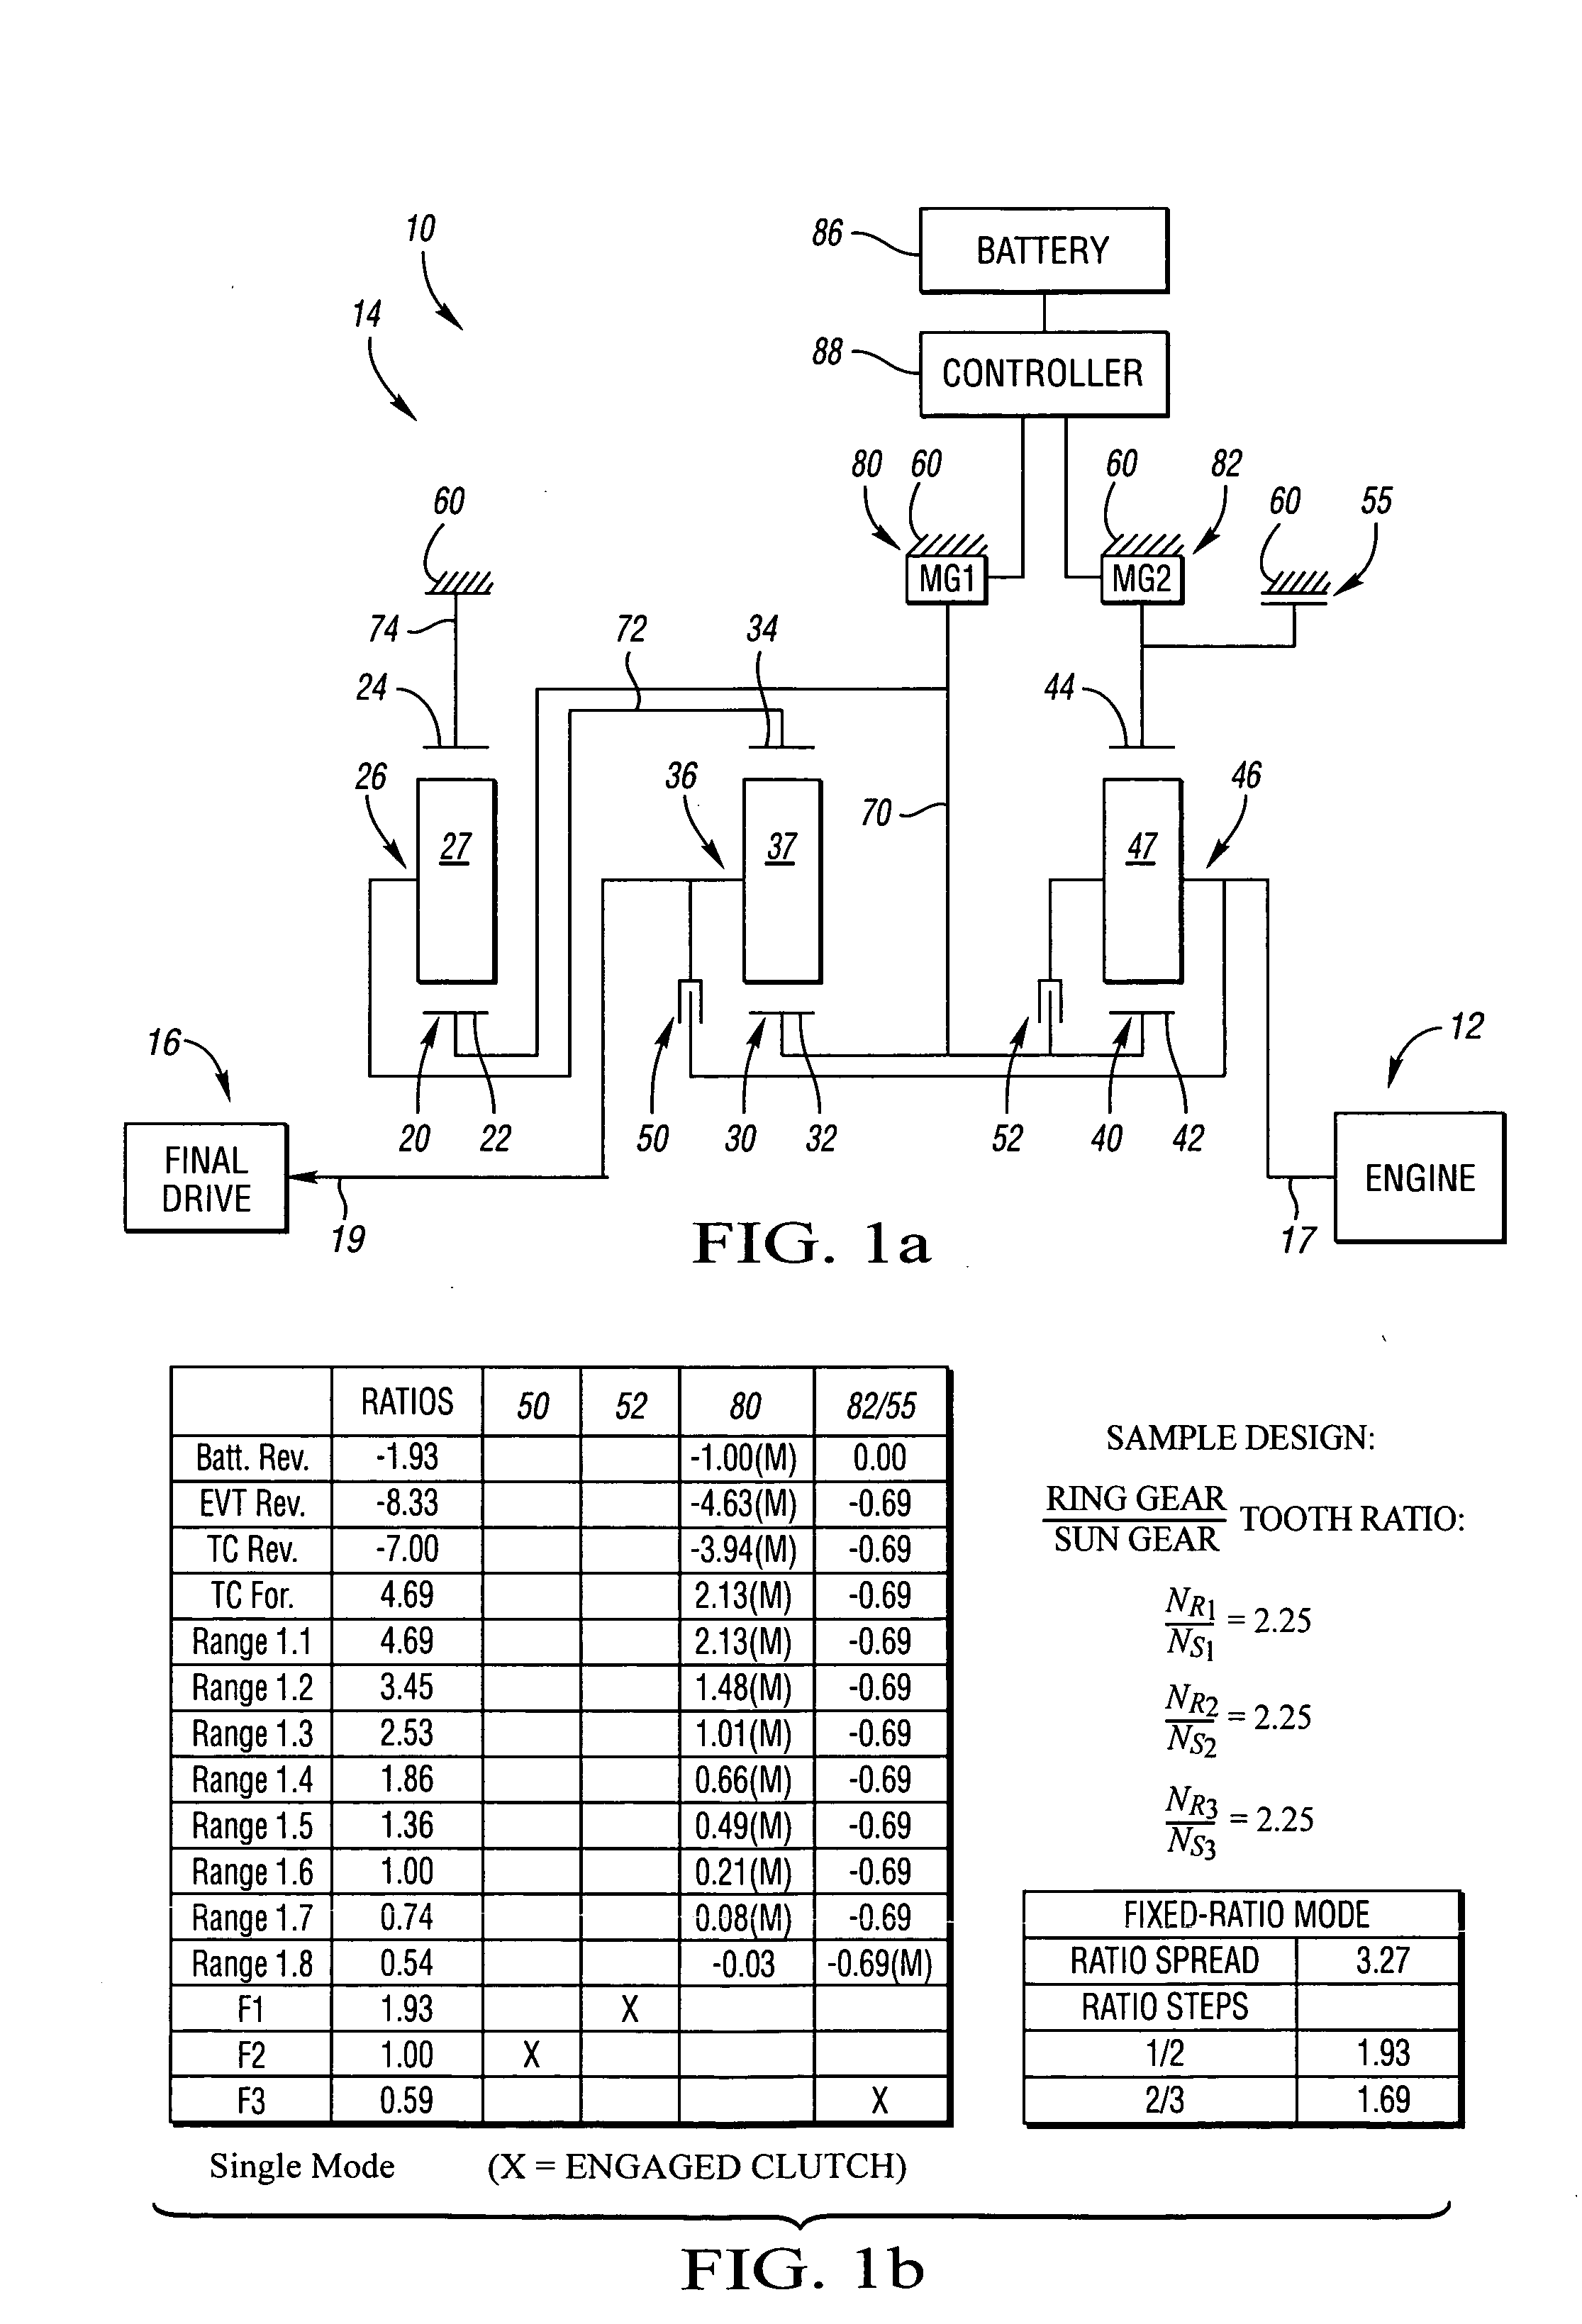 Electrically variable transmission having three planetary gear sets, two fixed interconnections and a stationary member